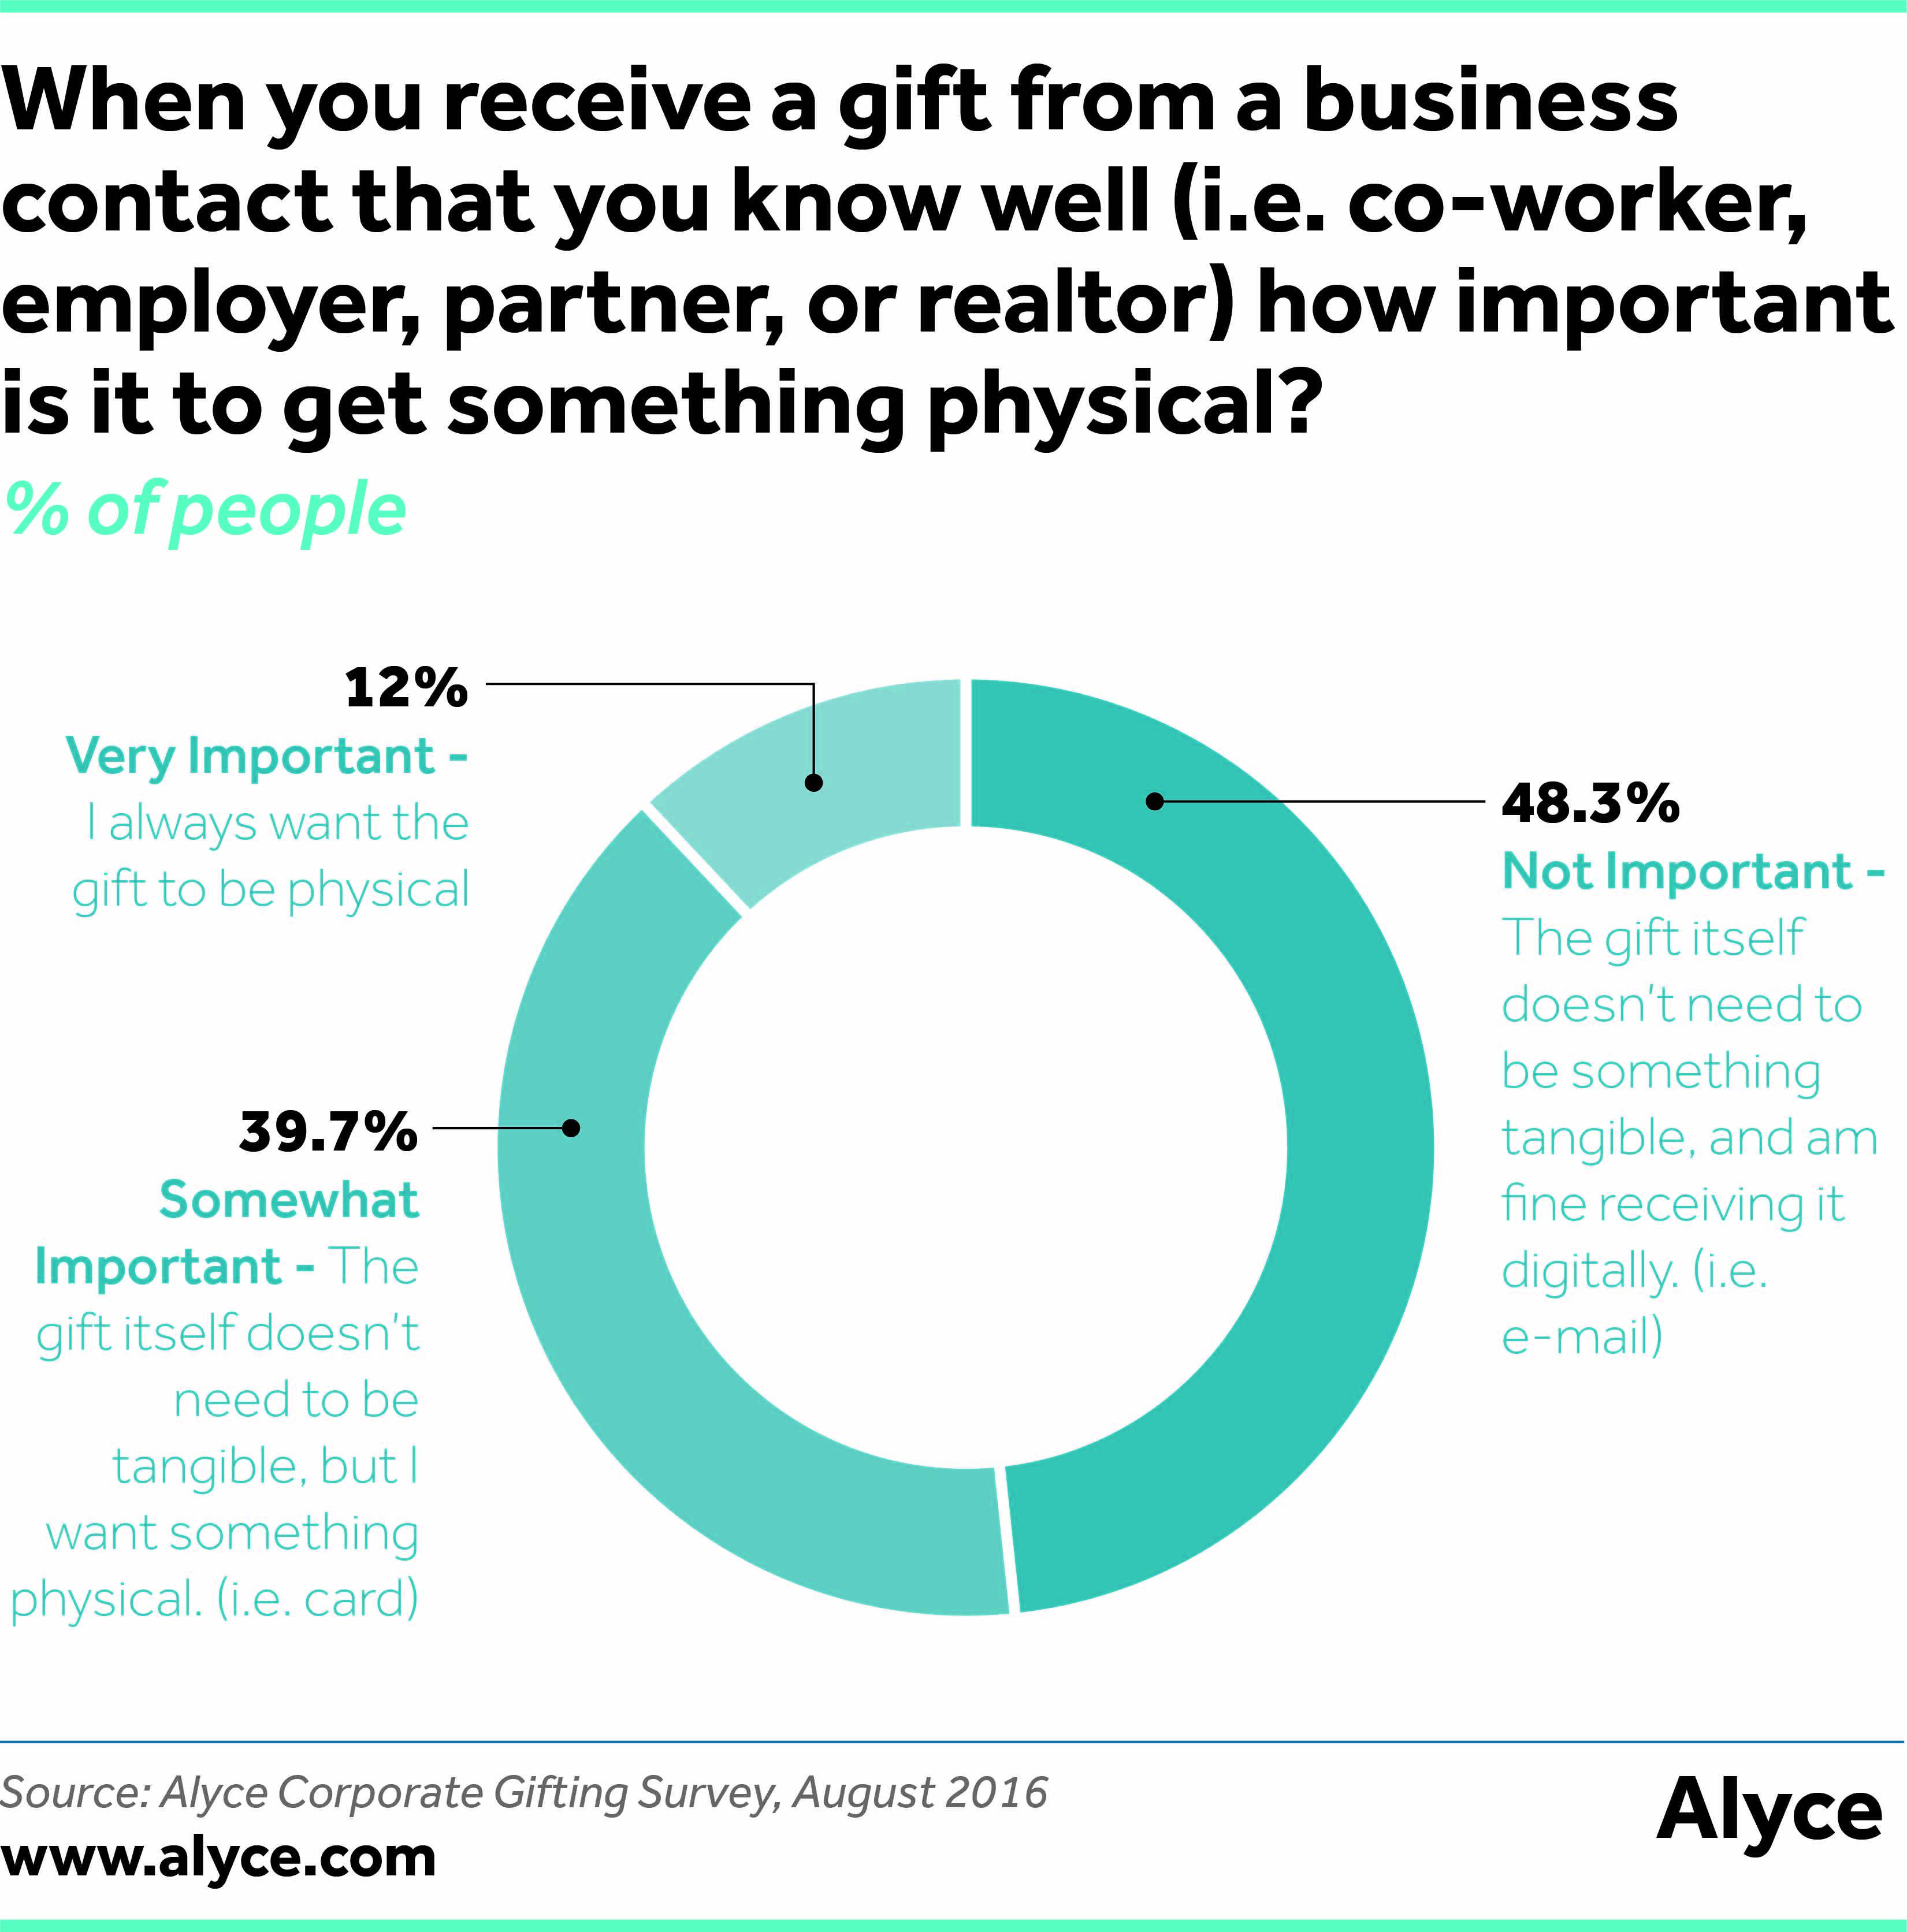 When you receive a gift from a business contact that you know well (i.e co-worker, employer, partner, or realtor) how important is to to get something physical?